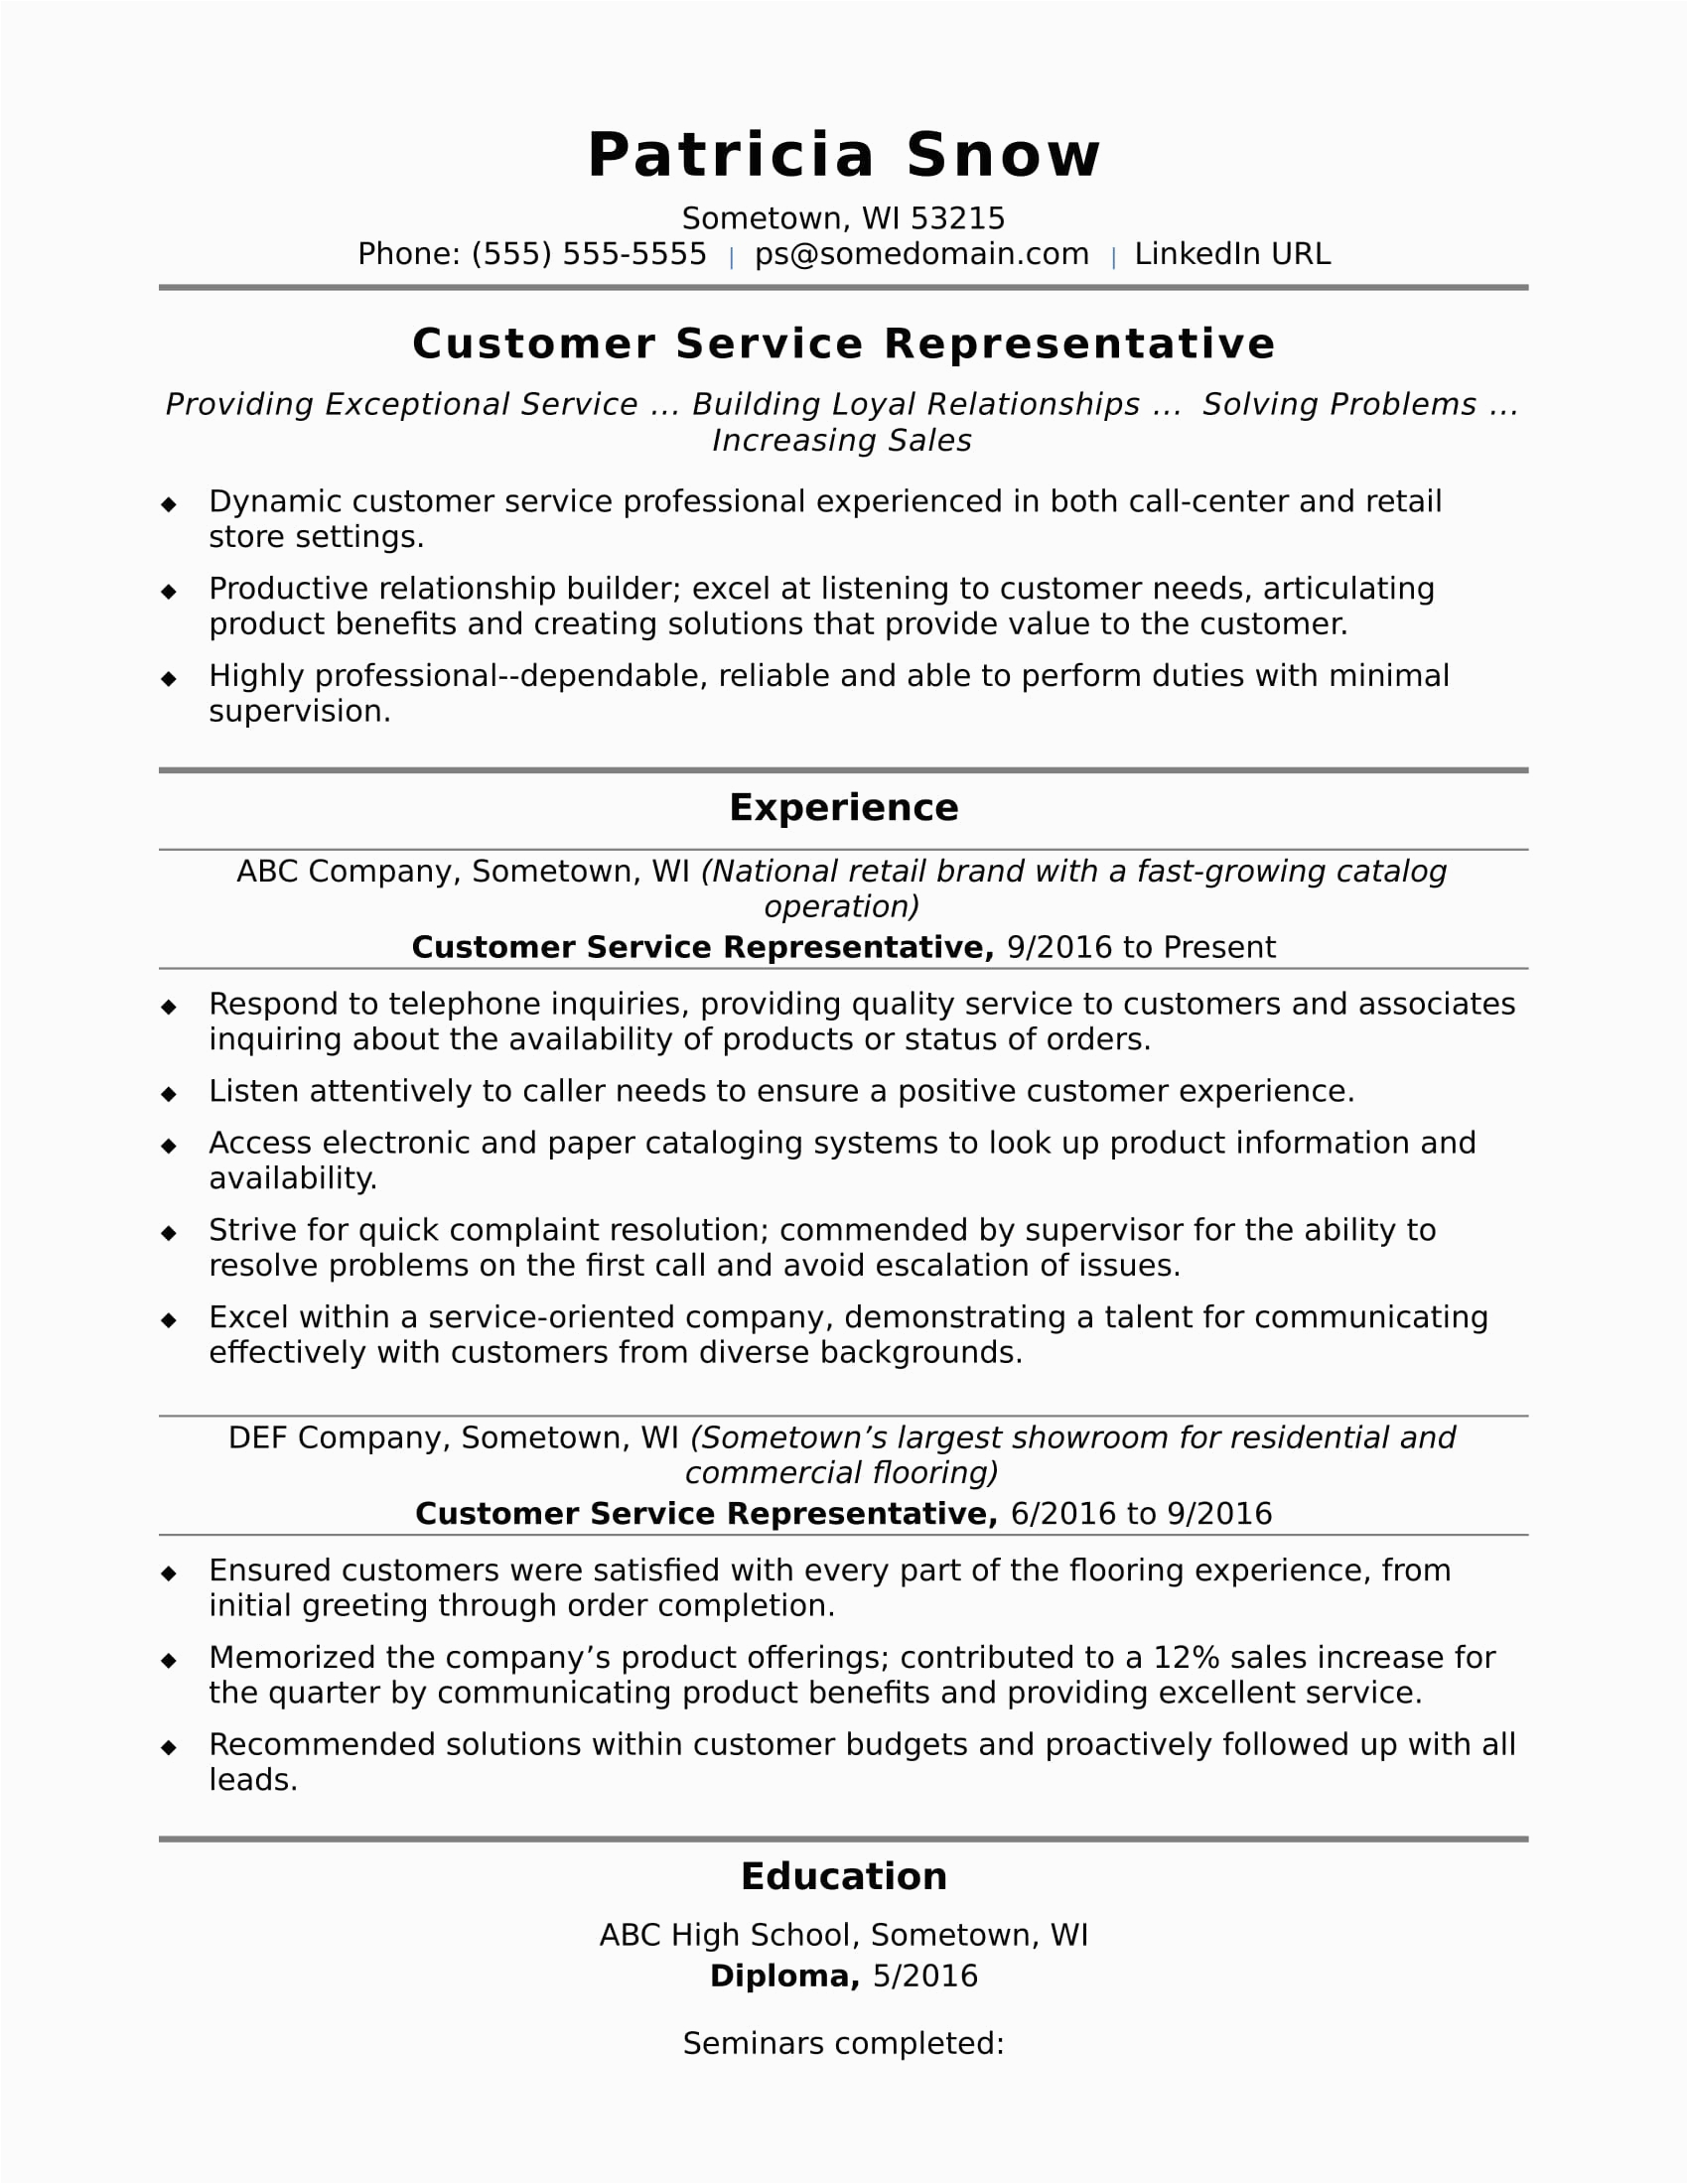 Sample Resumes for Jobs In Customer Service Entry Level Customer Service Resume Sample